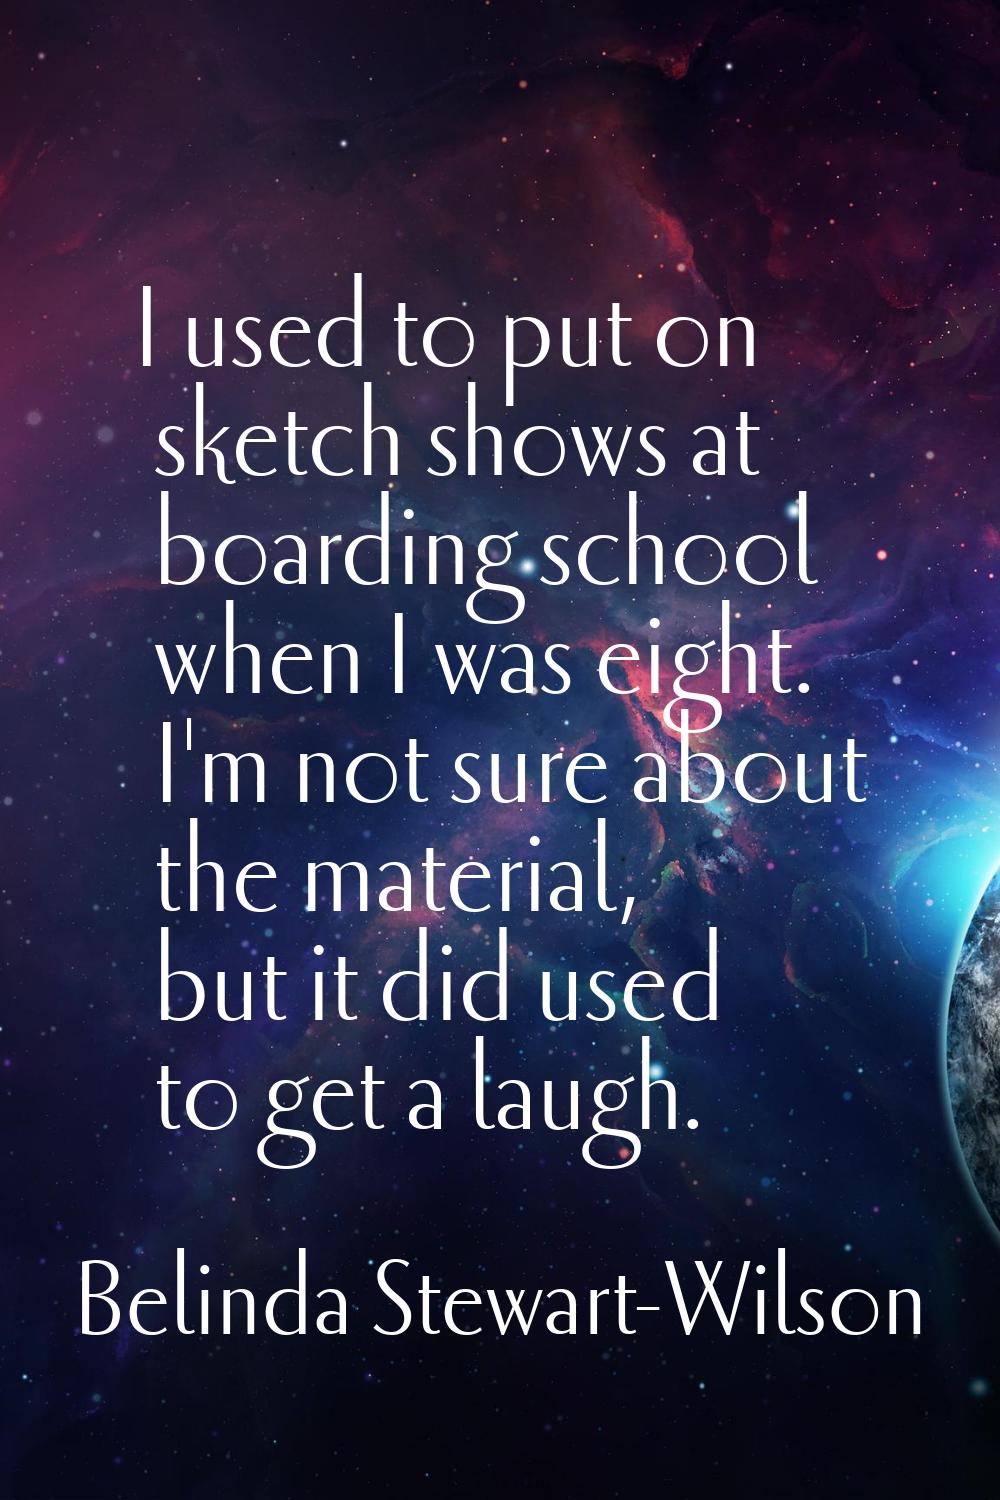 I used to put on sketch shows at boarding school when I was eight. I'm not sure about the material,